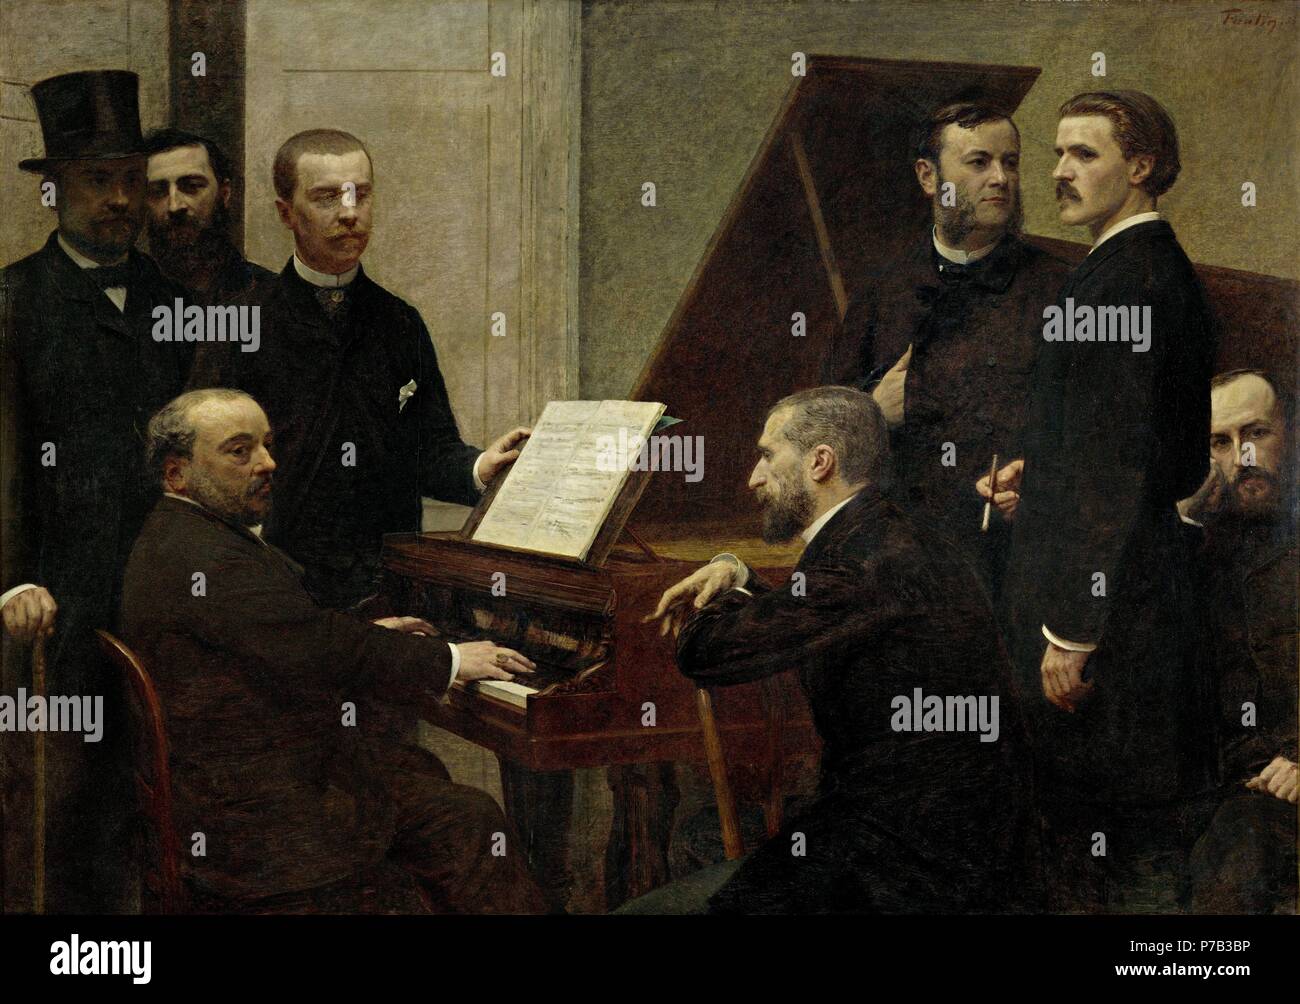 Henri Fantin-Latour / 'Around the piano (Emmanuel Chabrier at the piano), 1885, Oil on canvas, 160 x 222 cm. Artwork also known as: AUTOR DE PIANO. Museum: MUSEE D'ORSAY. Stock Photo